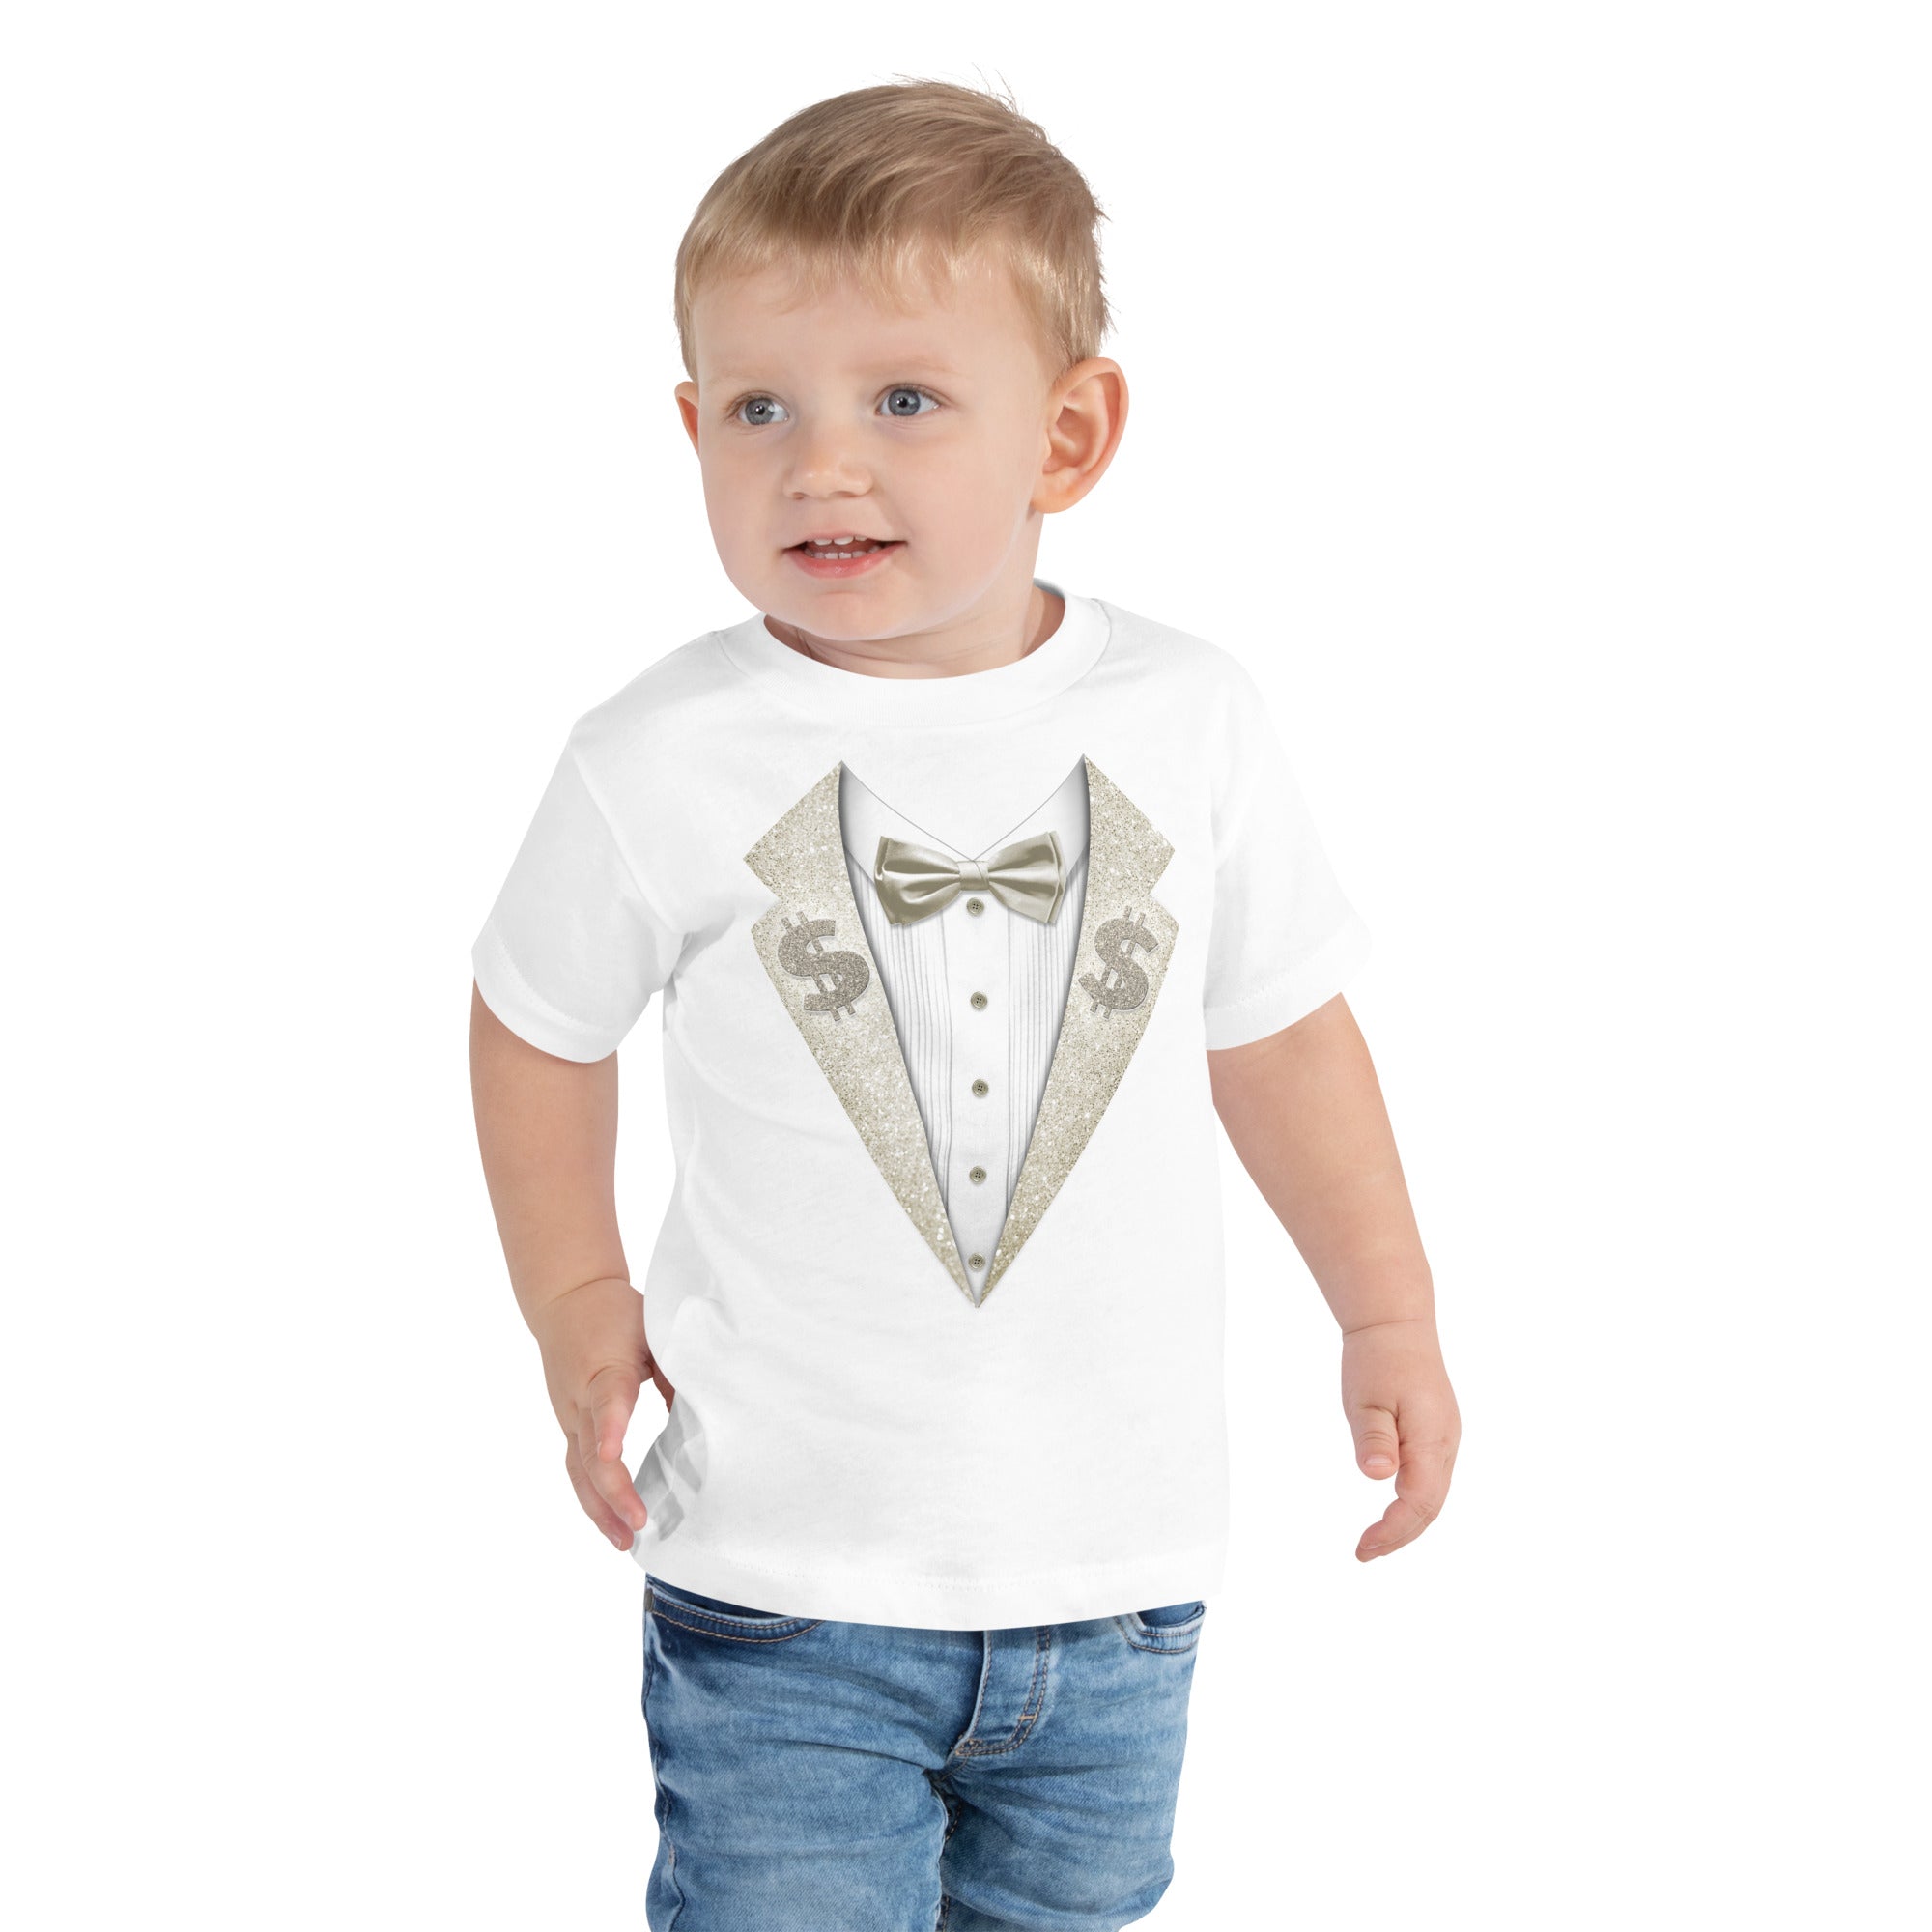 Ted DiBiase - White & Silver Toddler Suit Tee